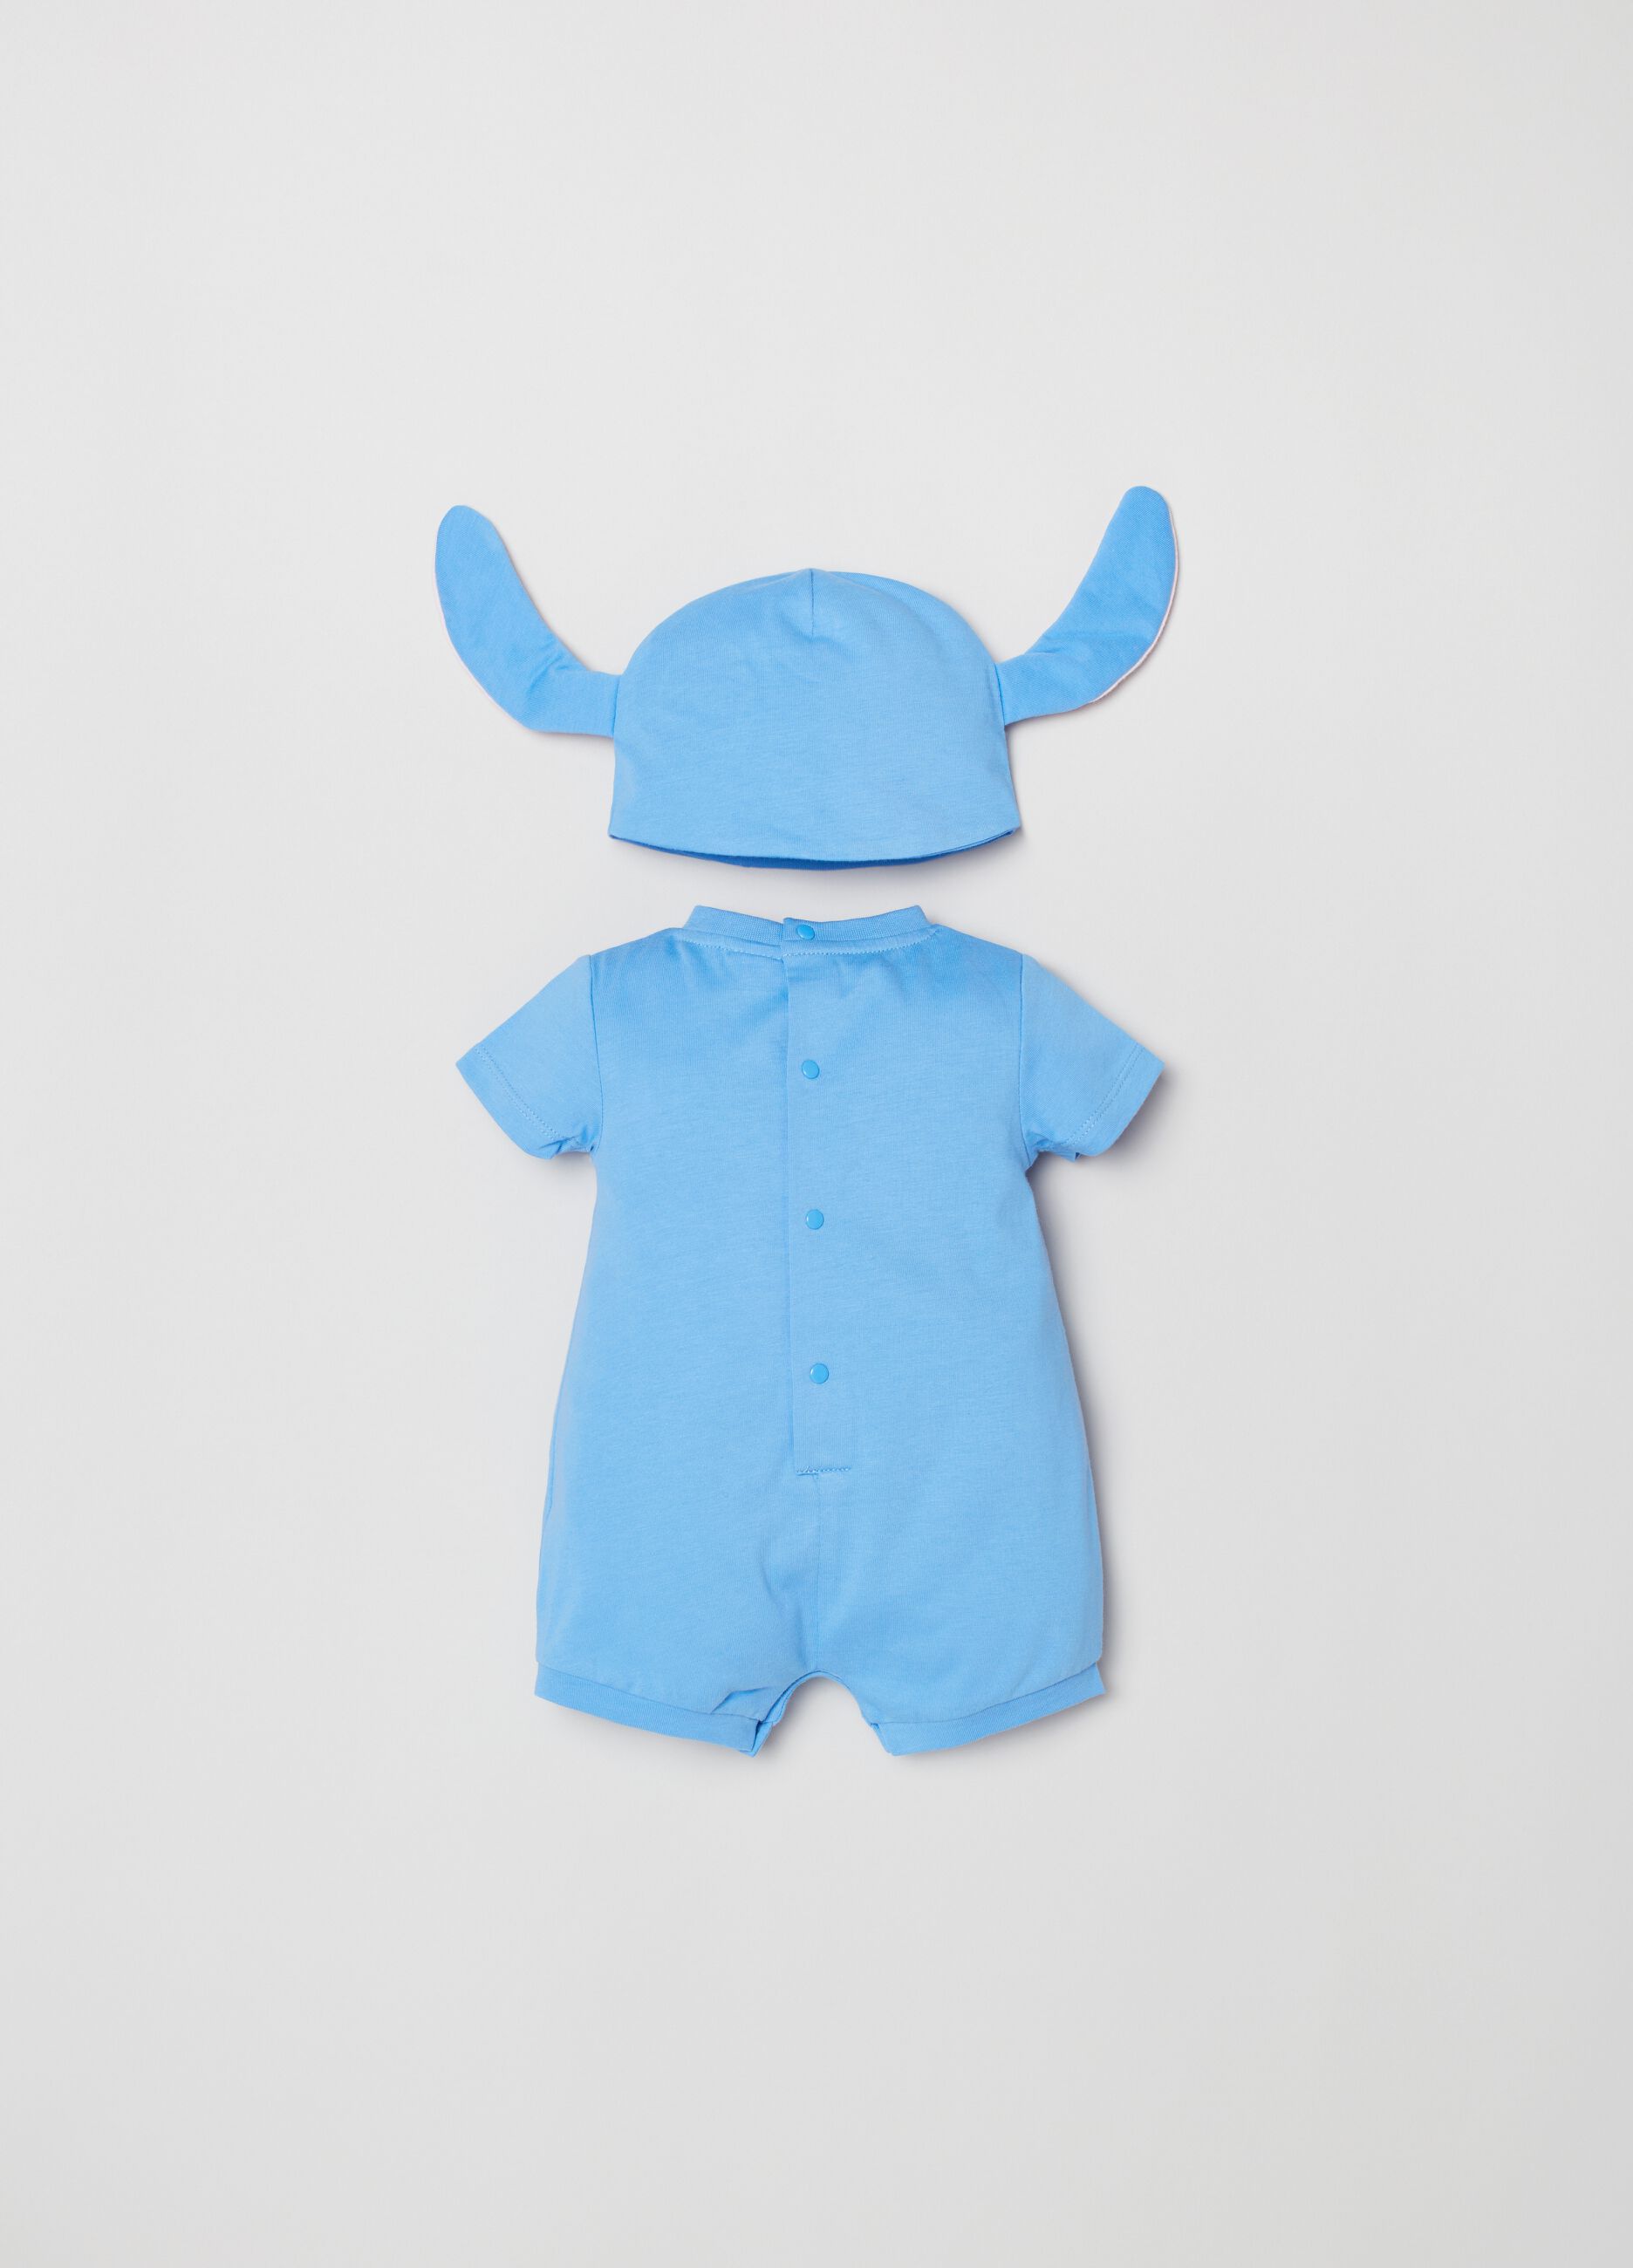 Stitch romper suit and hat with ears set